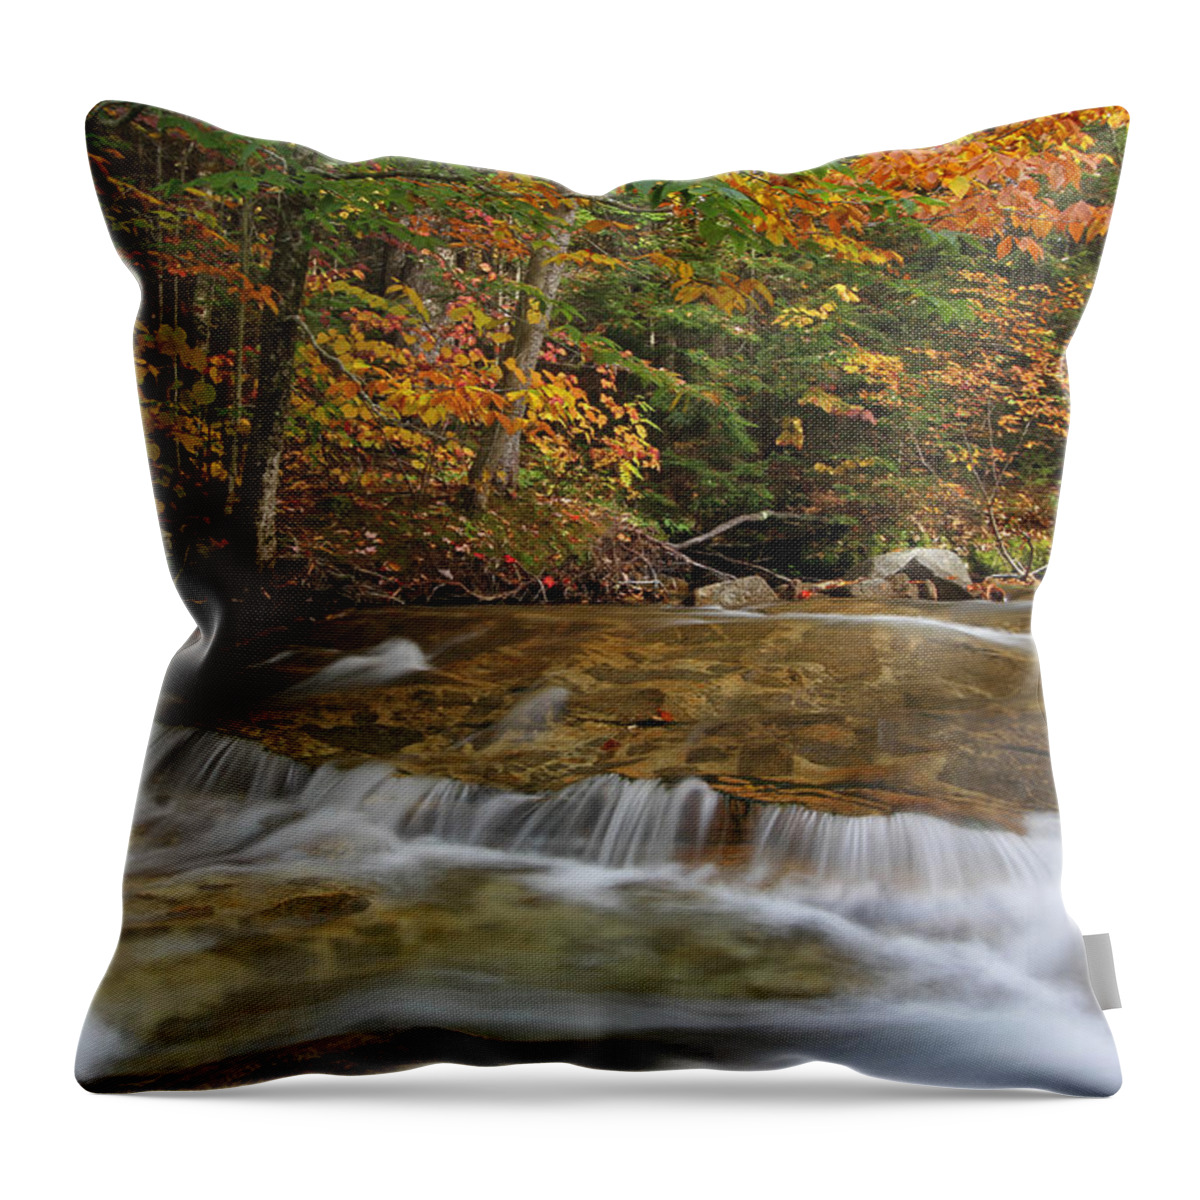 New Hampshire Throw Pillow featuring the photograph Pemigewasset River Cascades in Autumn by Juergen Roth